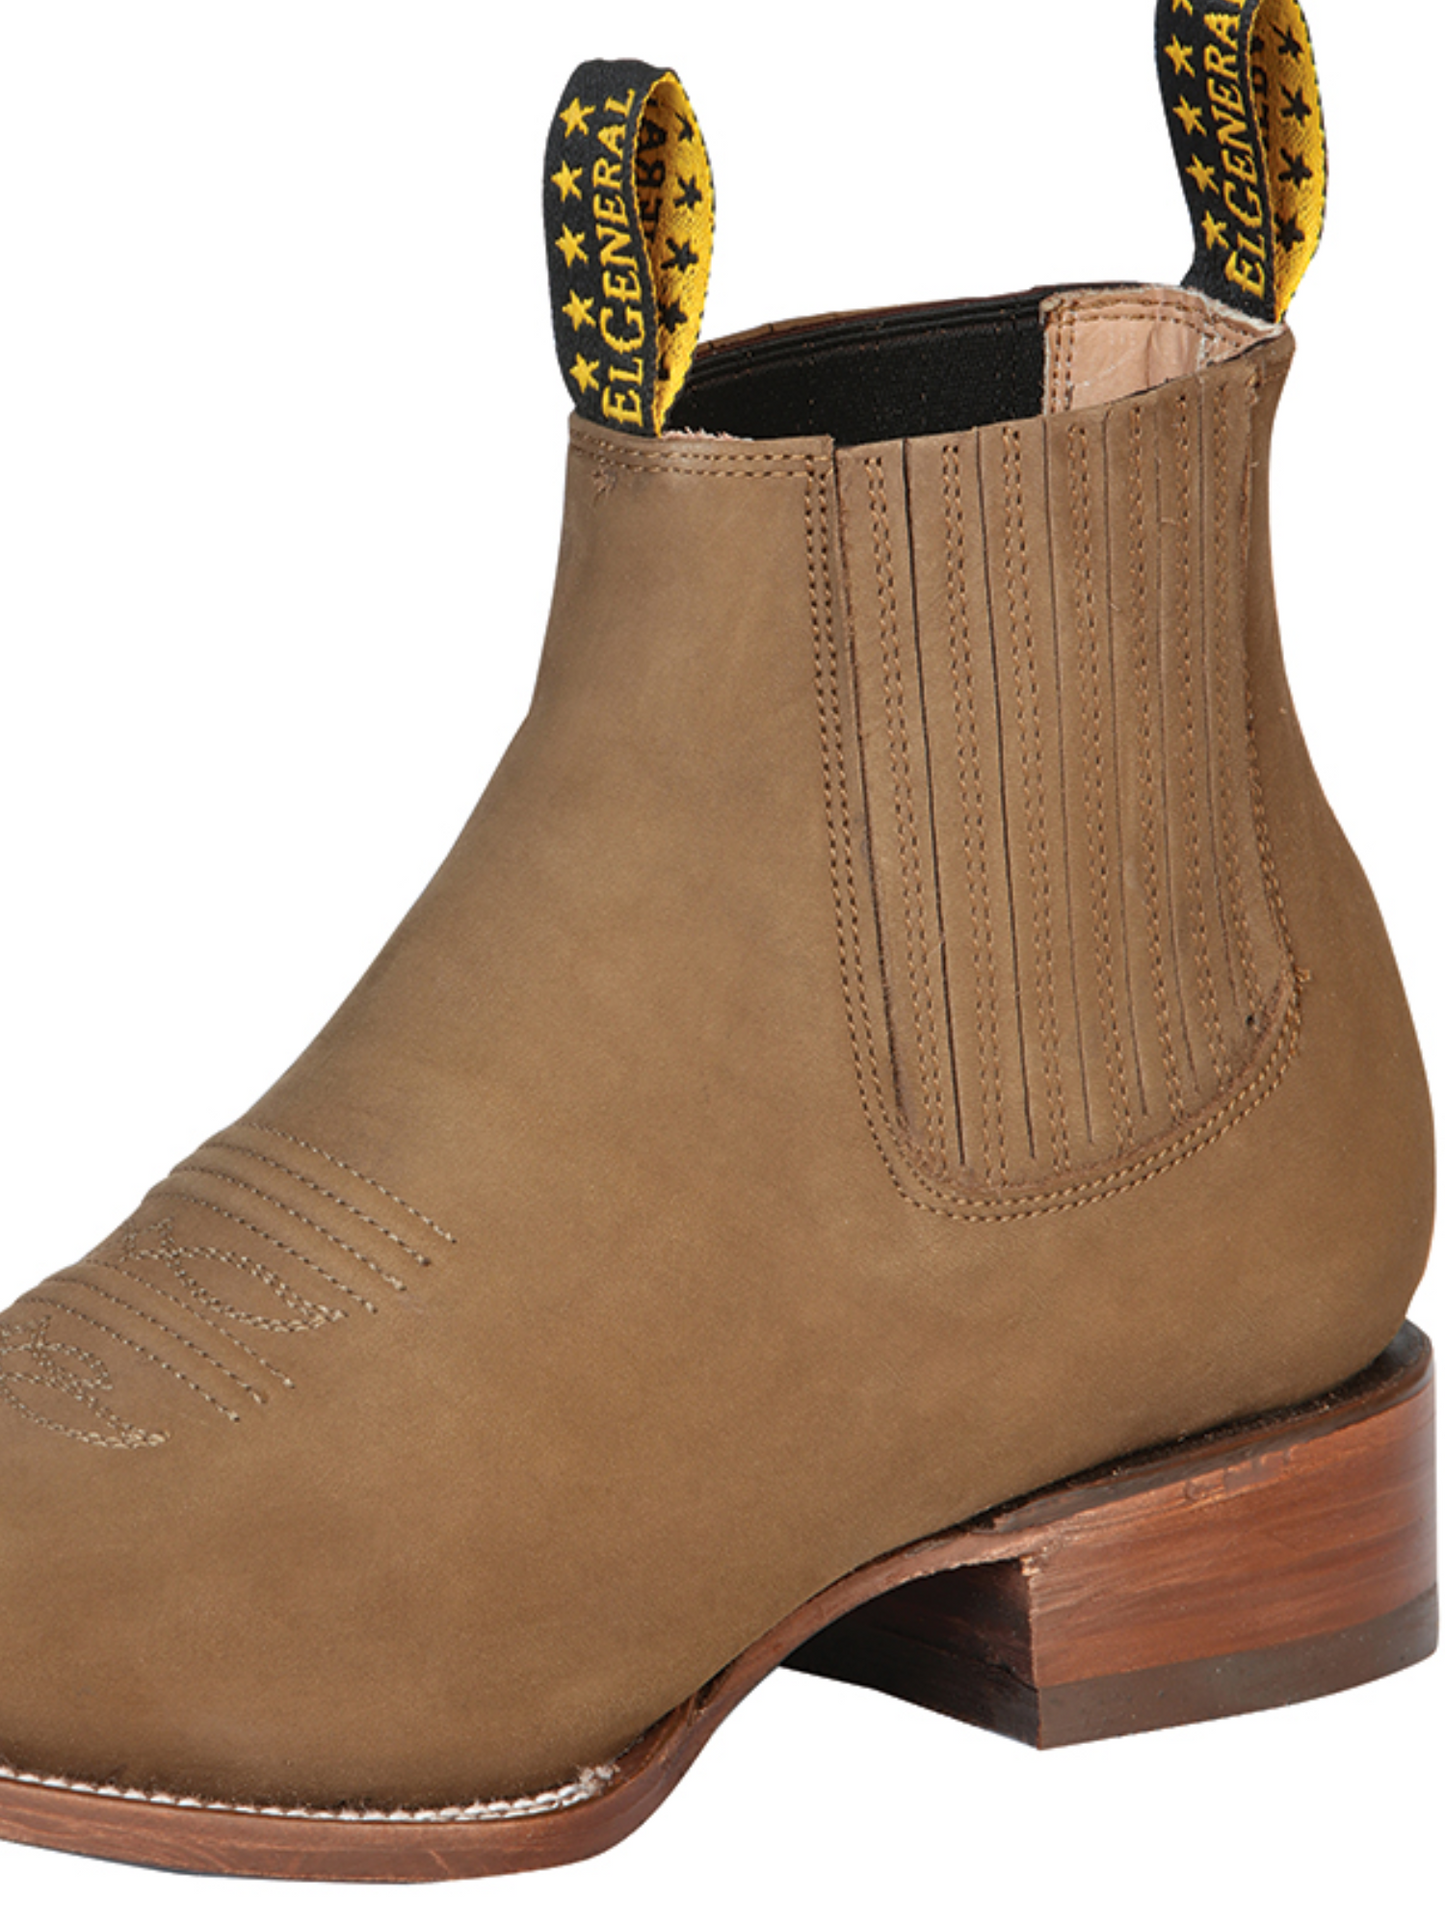 Classic Nubuck Leather Rodeo Cowboy Ankle Boots for Men 'El General' - ID: 126195 Western Ankle Boots El General